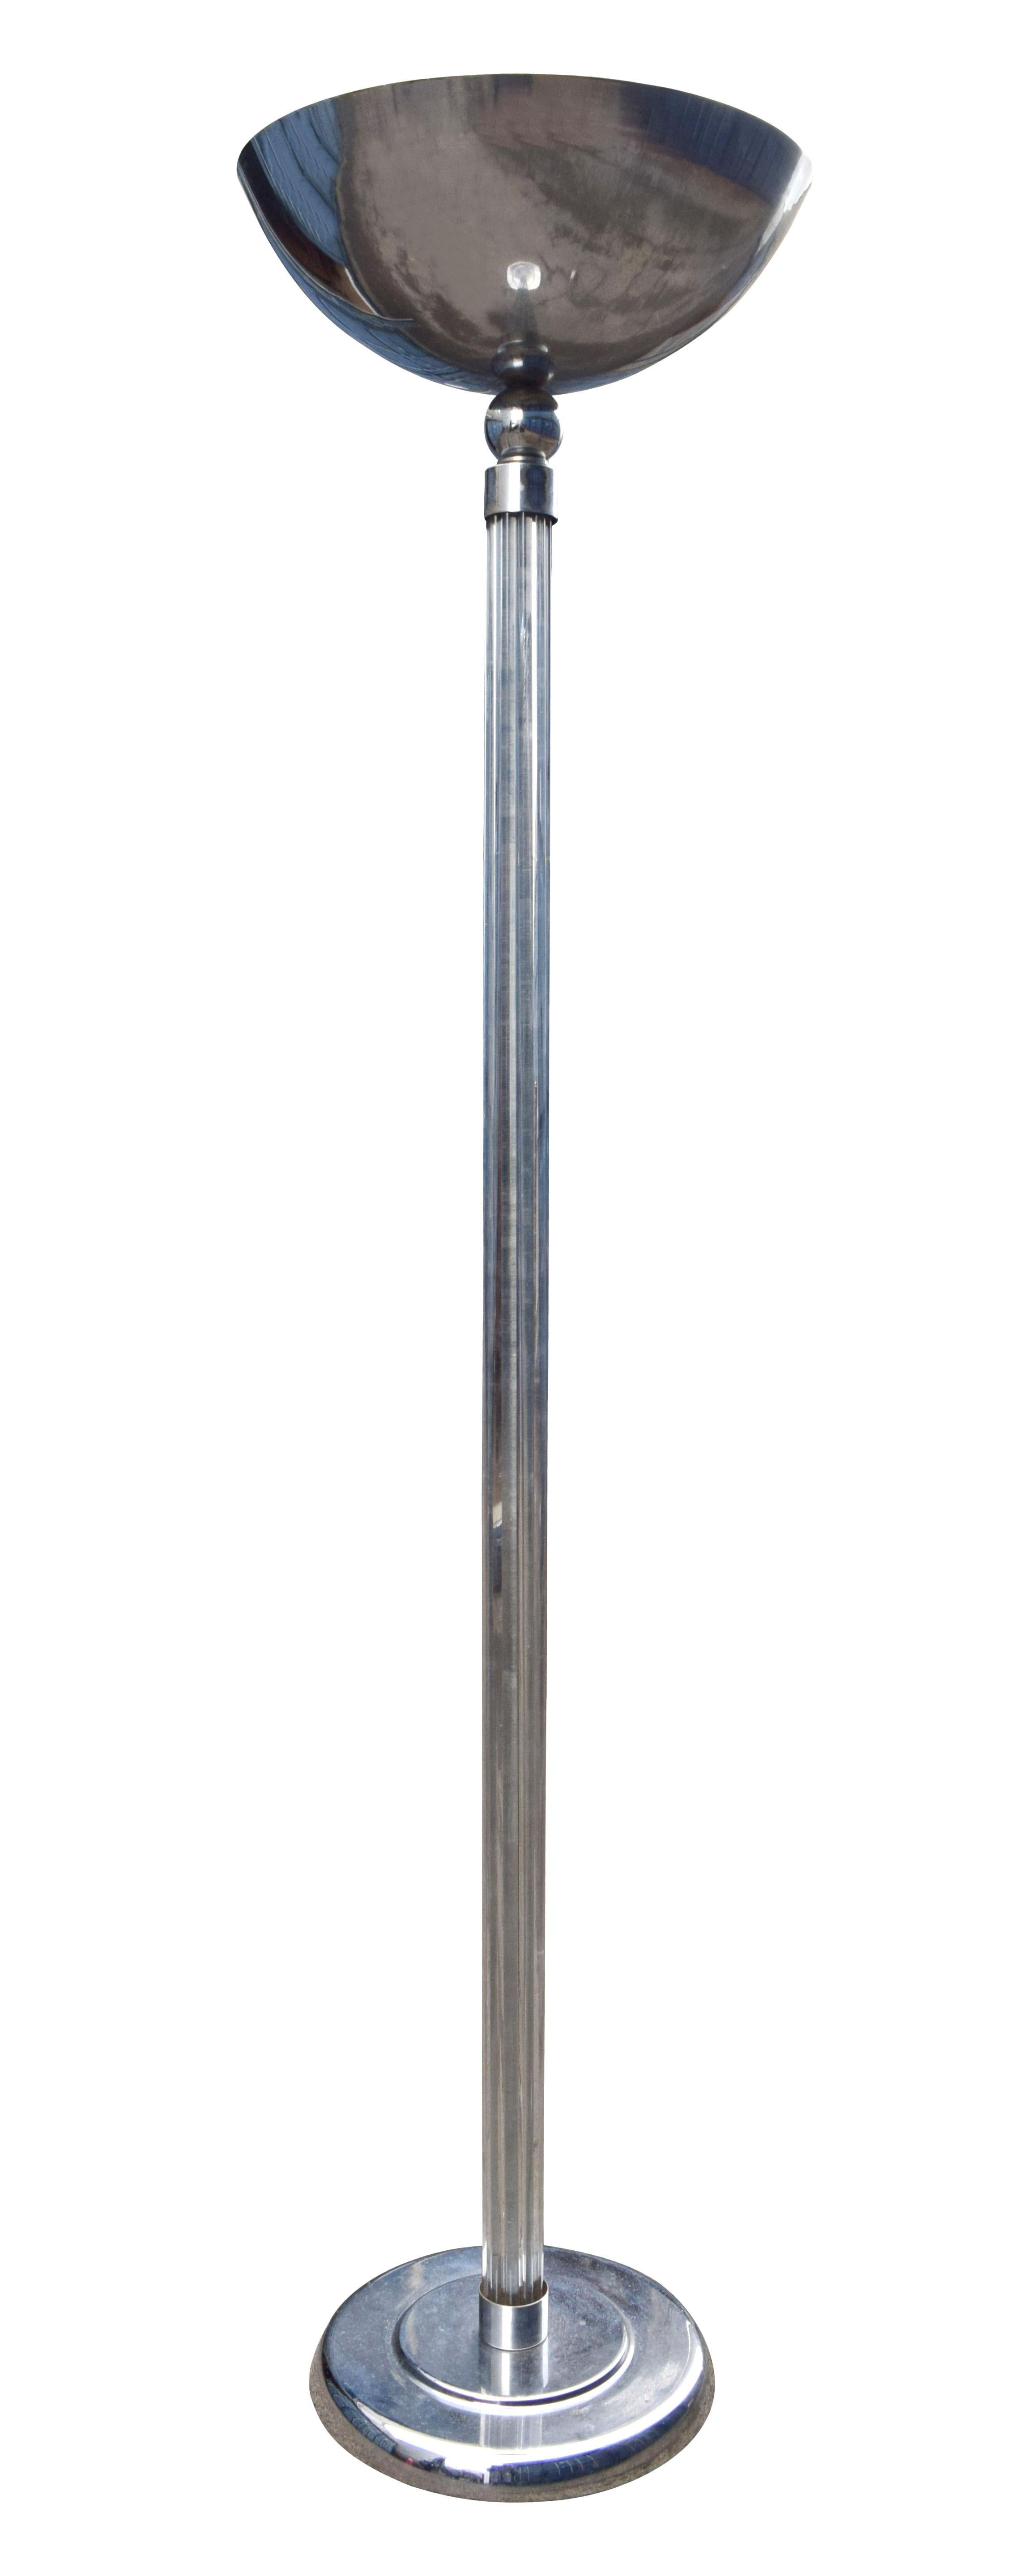 20th Century Art Deco Chrome and Glass Uplighter Floor Lamp, 1930s  For Sale